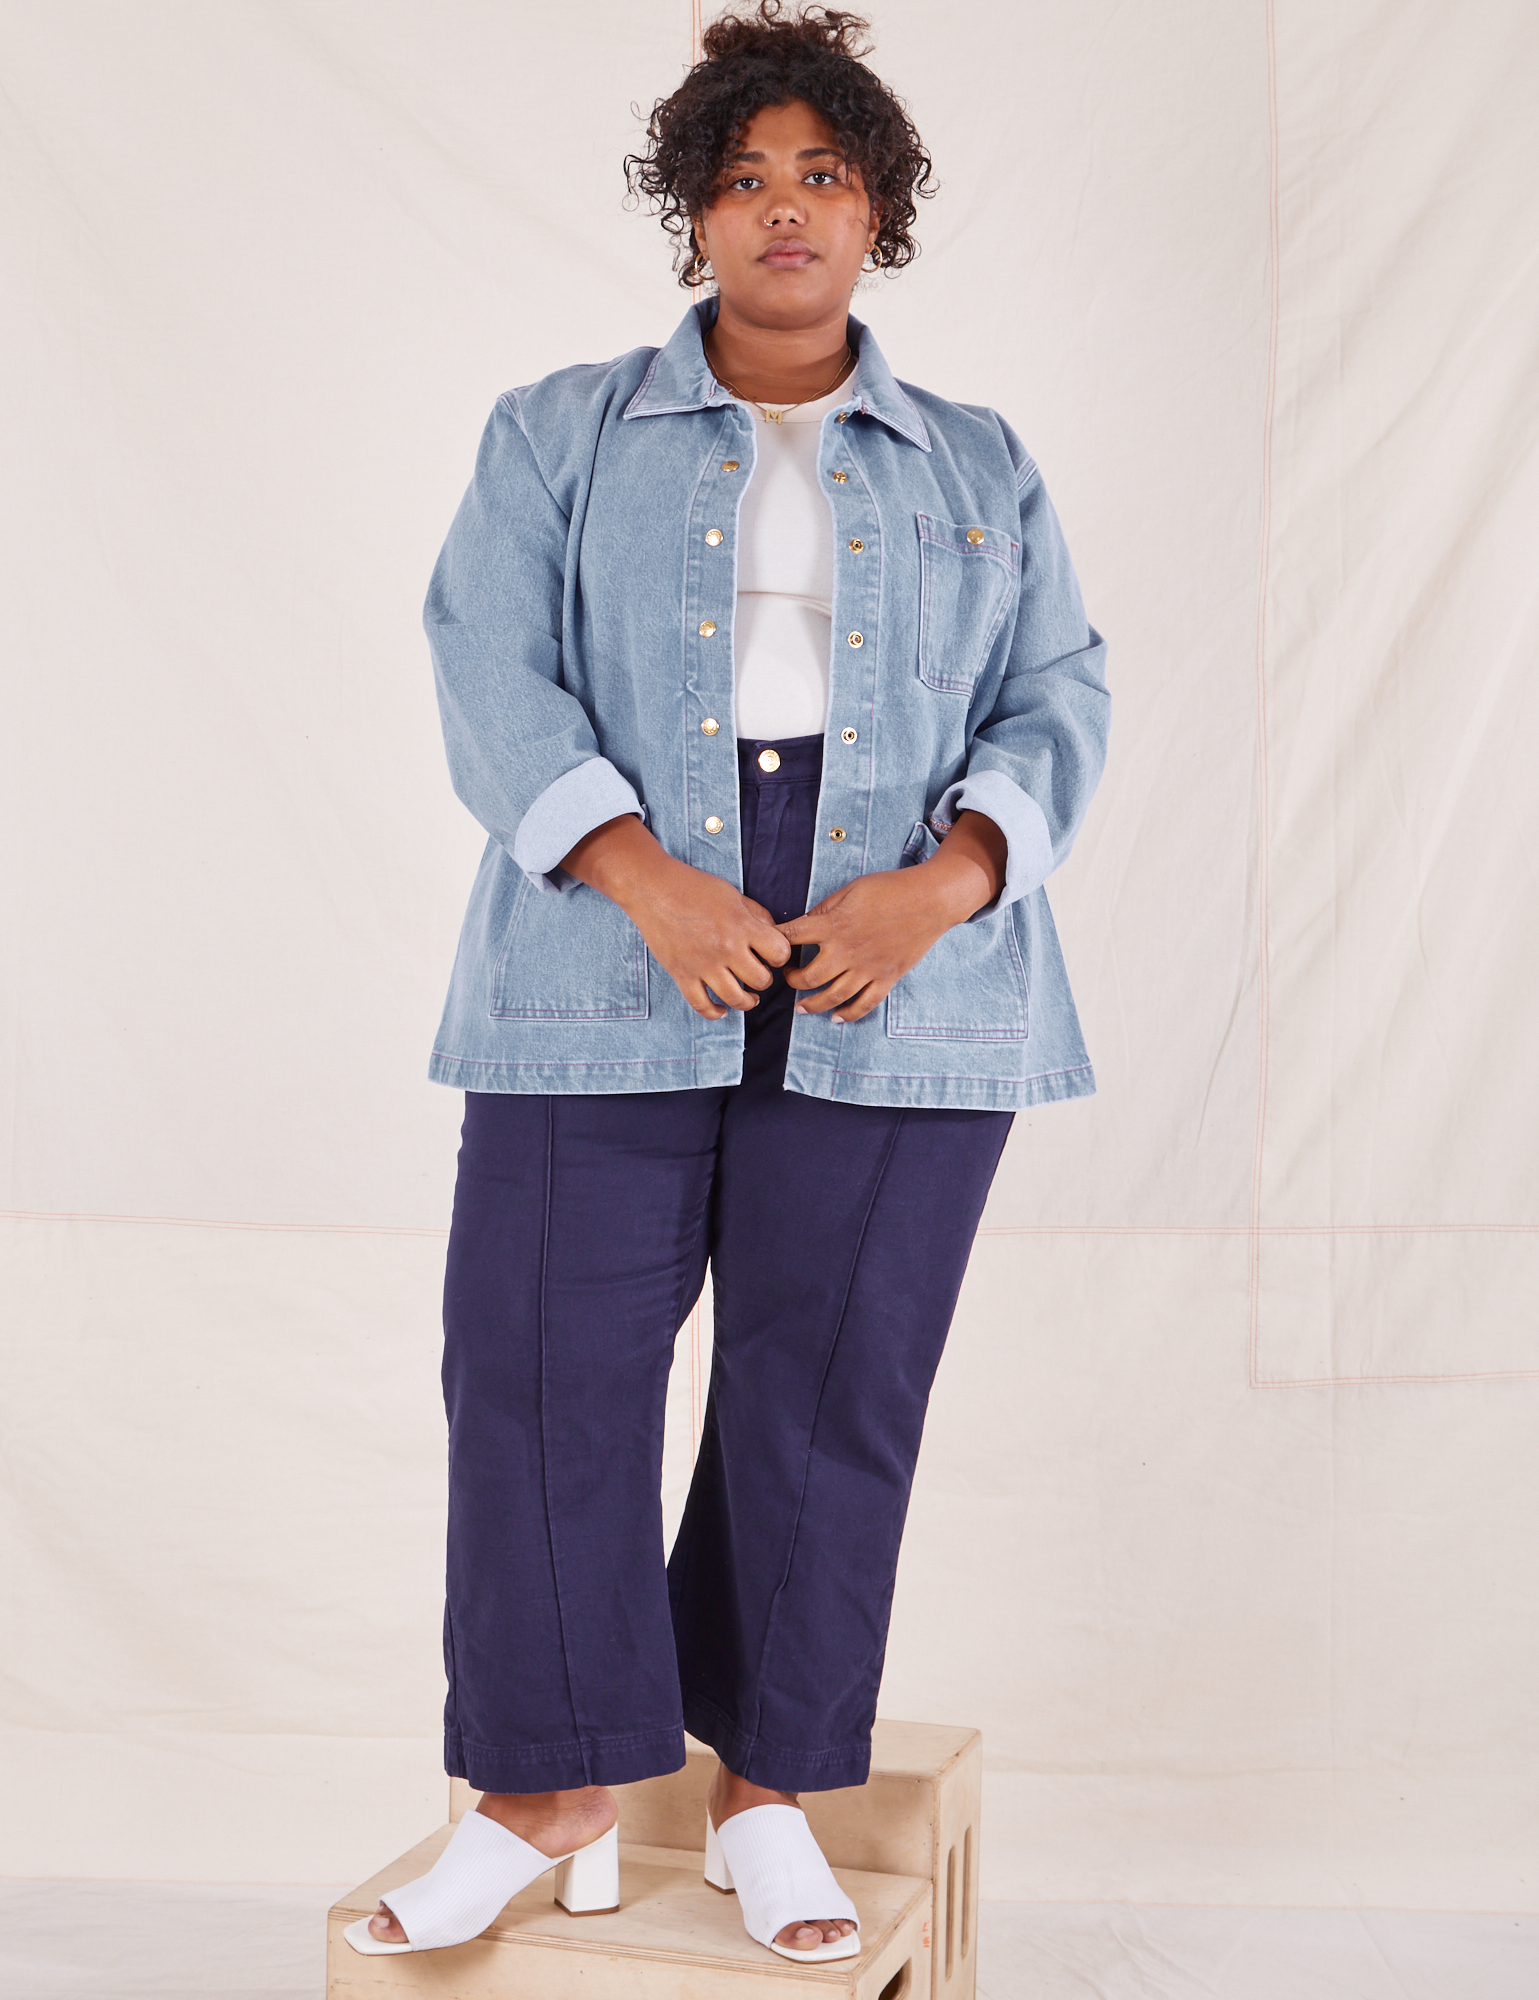 Morgan is 5&#39;5&quot; and wearing 1XL Indigo Denim Work Jacket in Light Wash paired with navy Western Pants